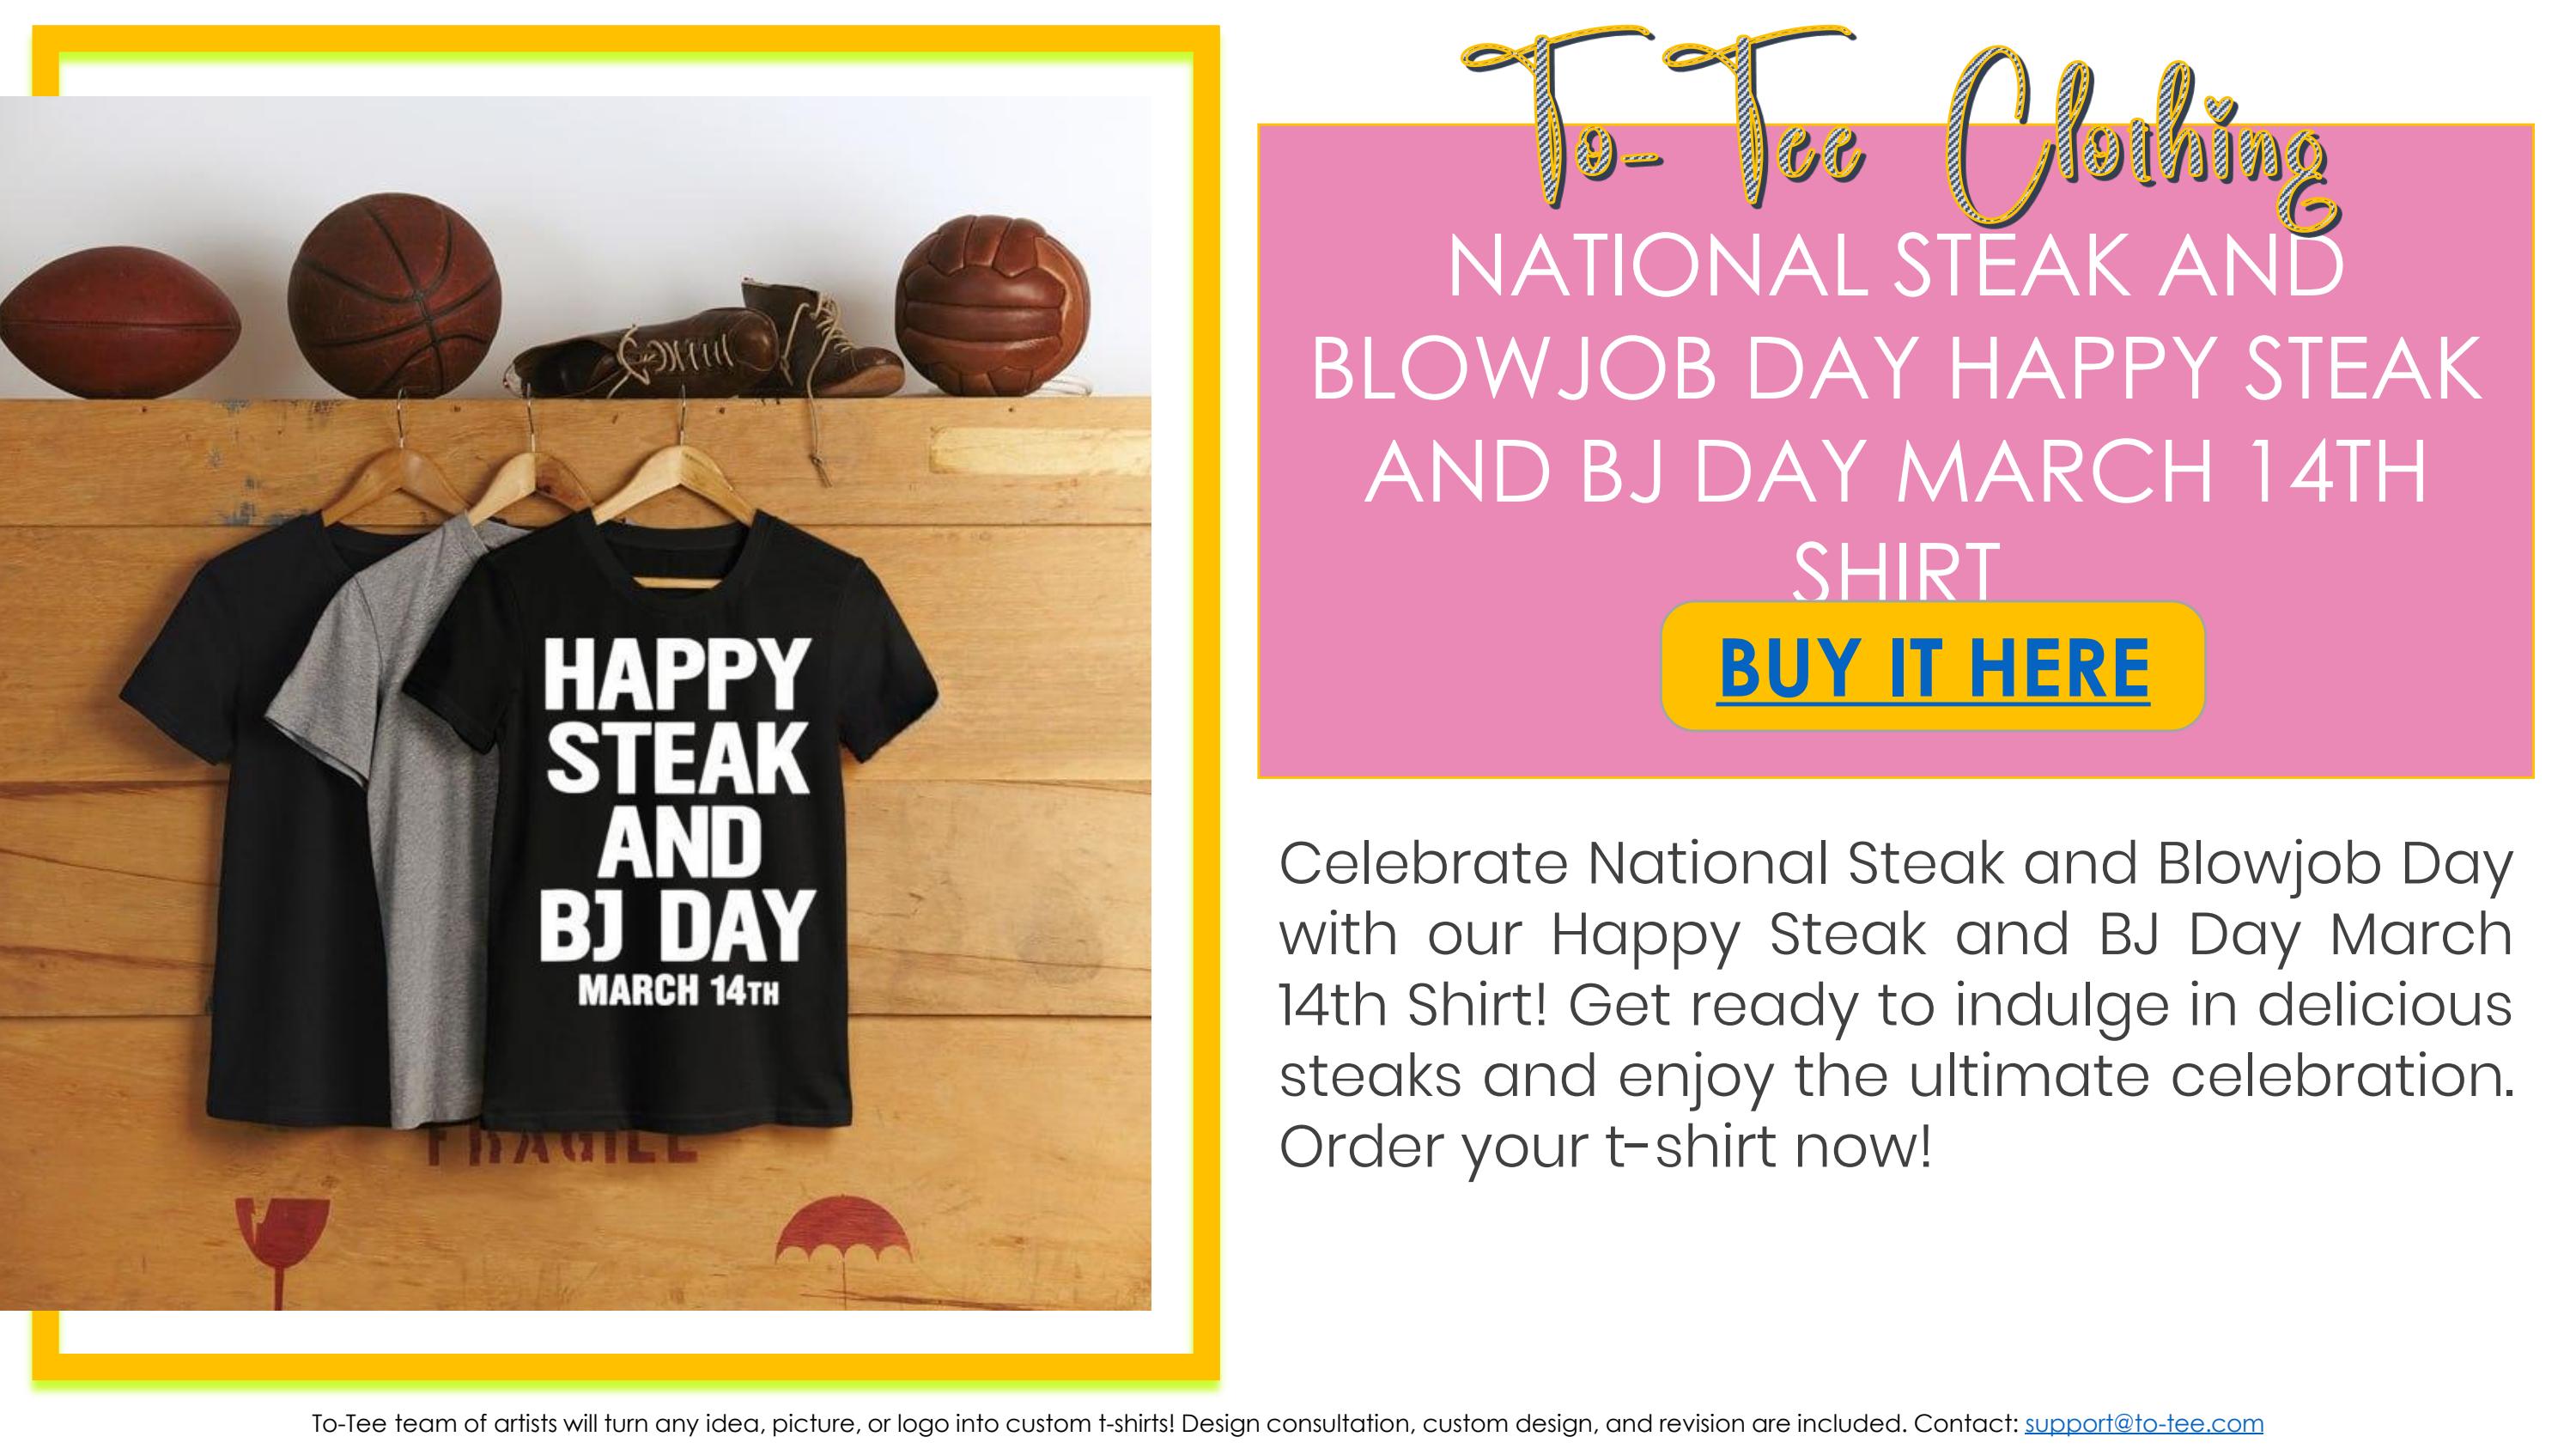 bruce wentworth add national steak and blow job day photo